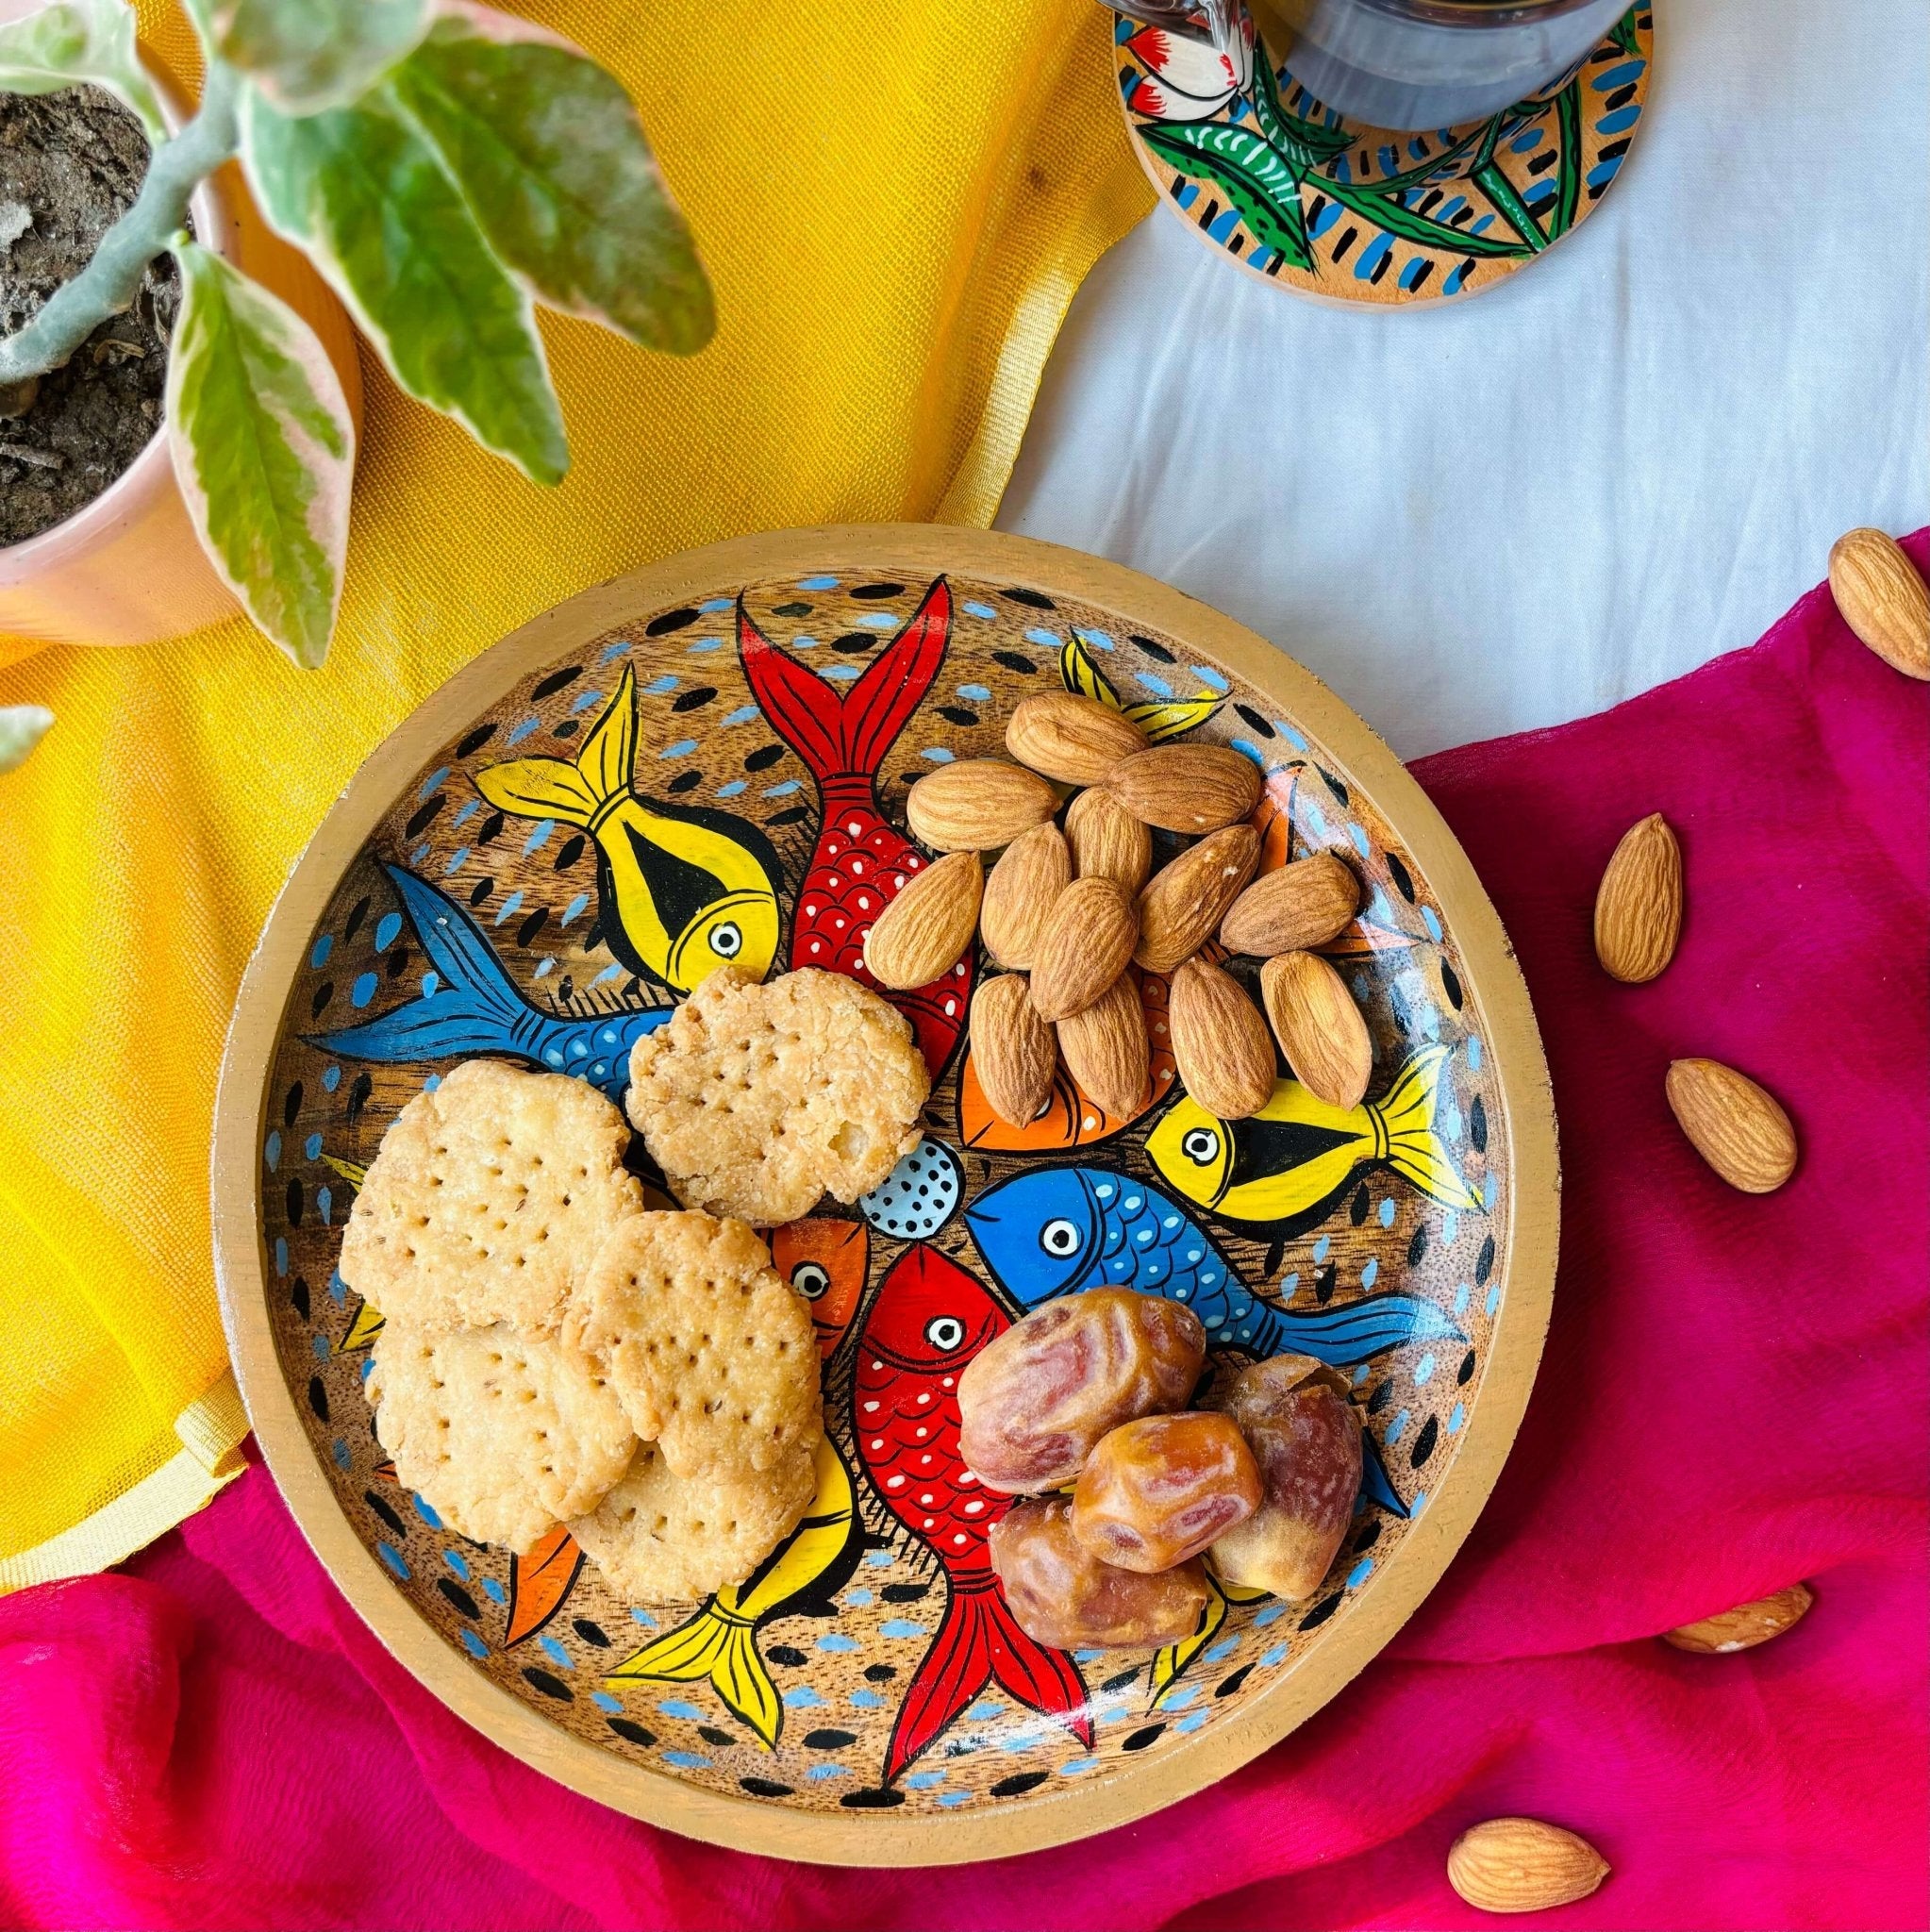 Biscuits, dates and almonds are served in a handcrafted mango wood round wooden tray or a trinket tray, painted with fish motifs by generational Pattachitra artists